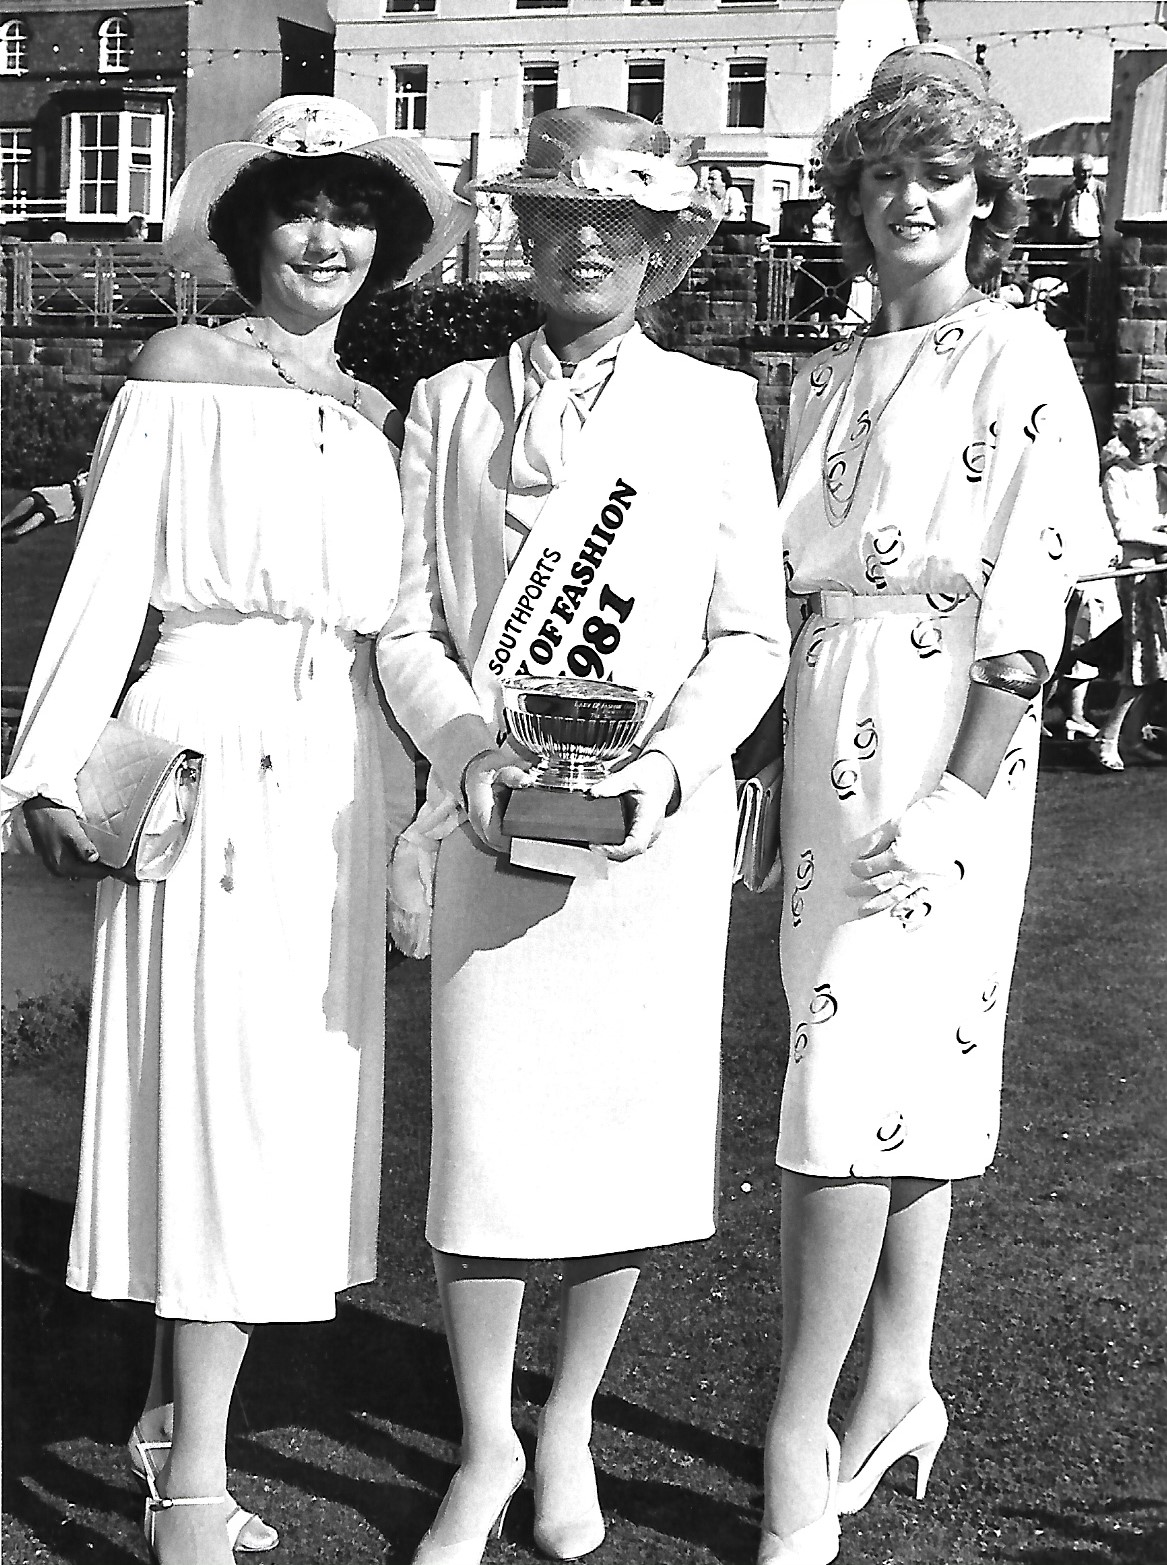 Three very elegant ladies show off their fine dresses and hats - and a handsome looking trophy - at the Southport Lady of Fashion 1981 event in the Floral Hall Gardens